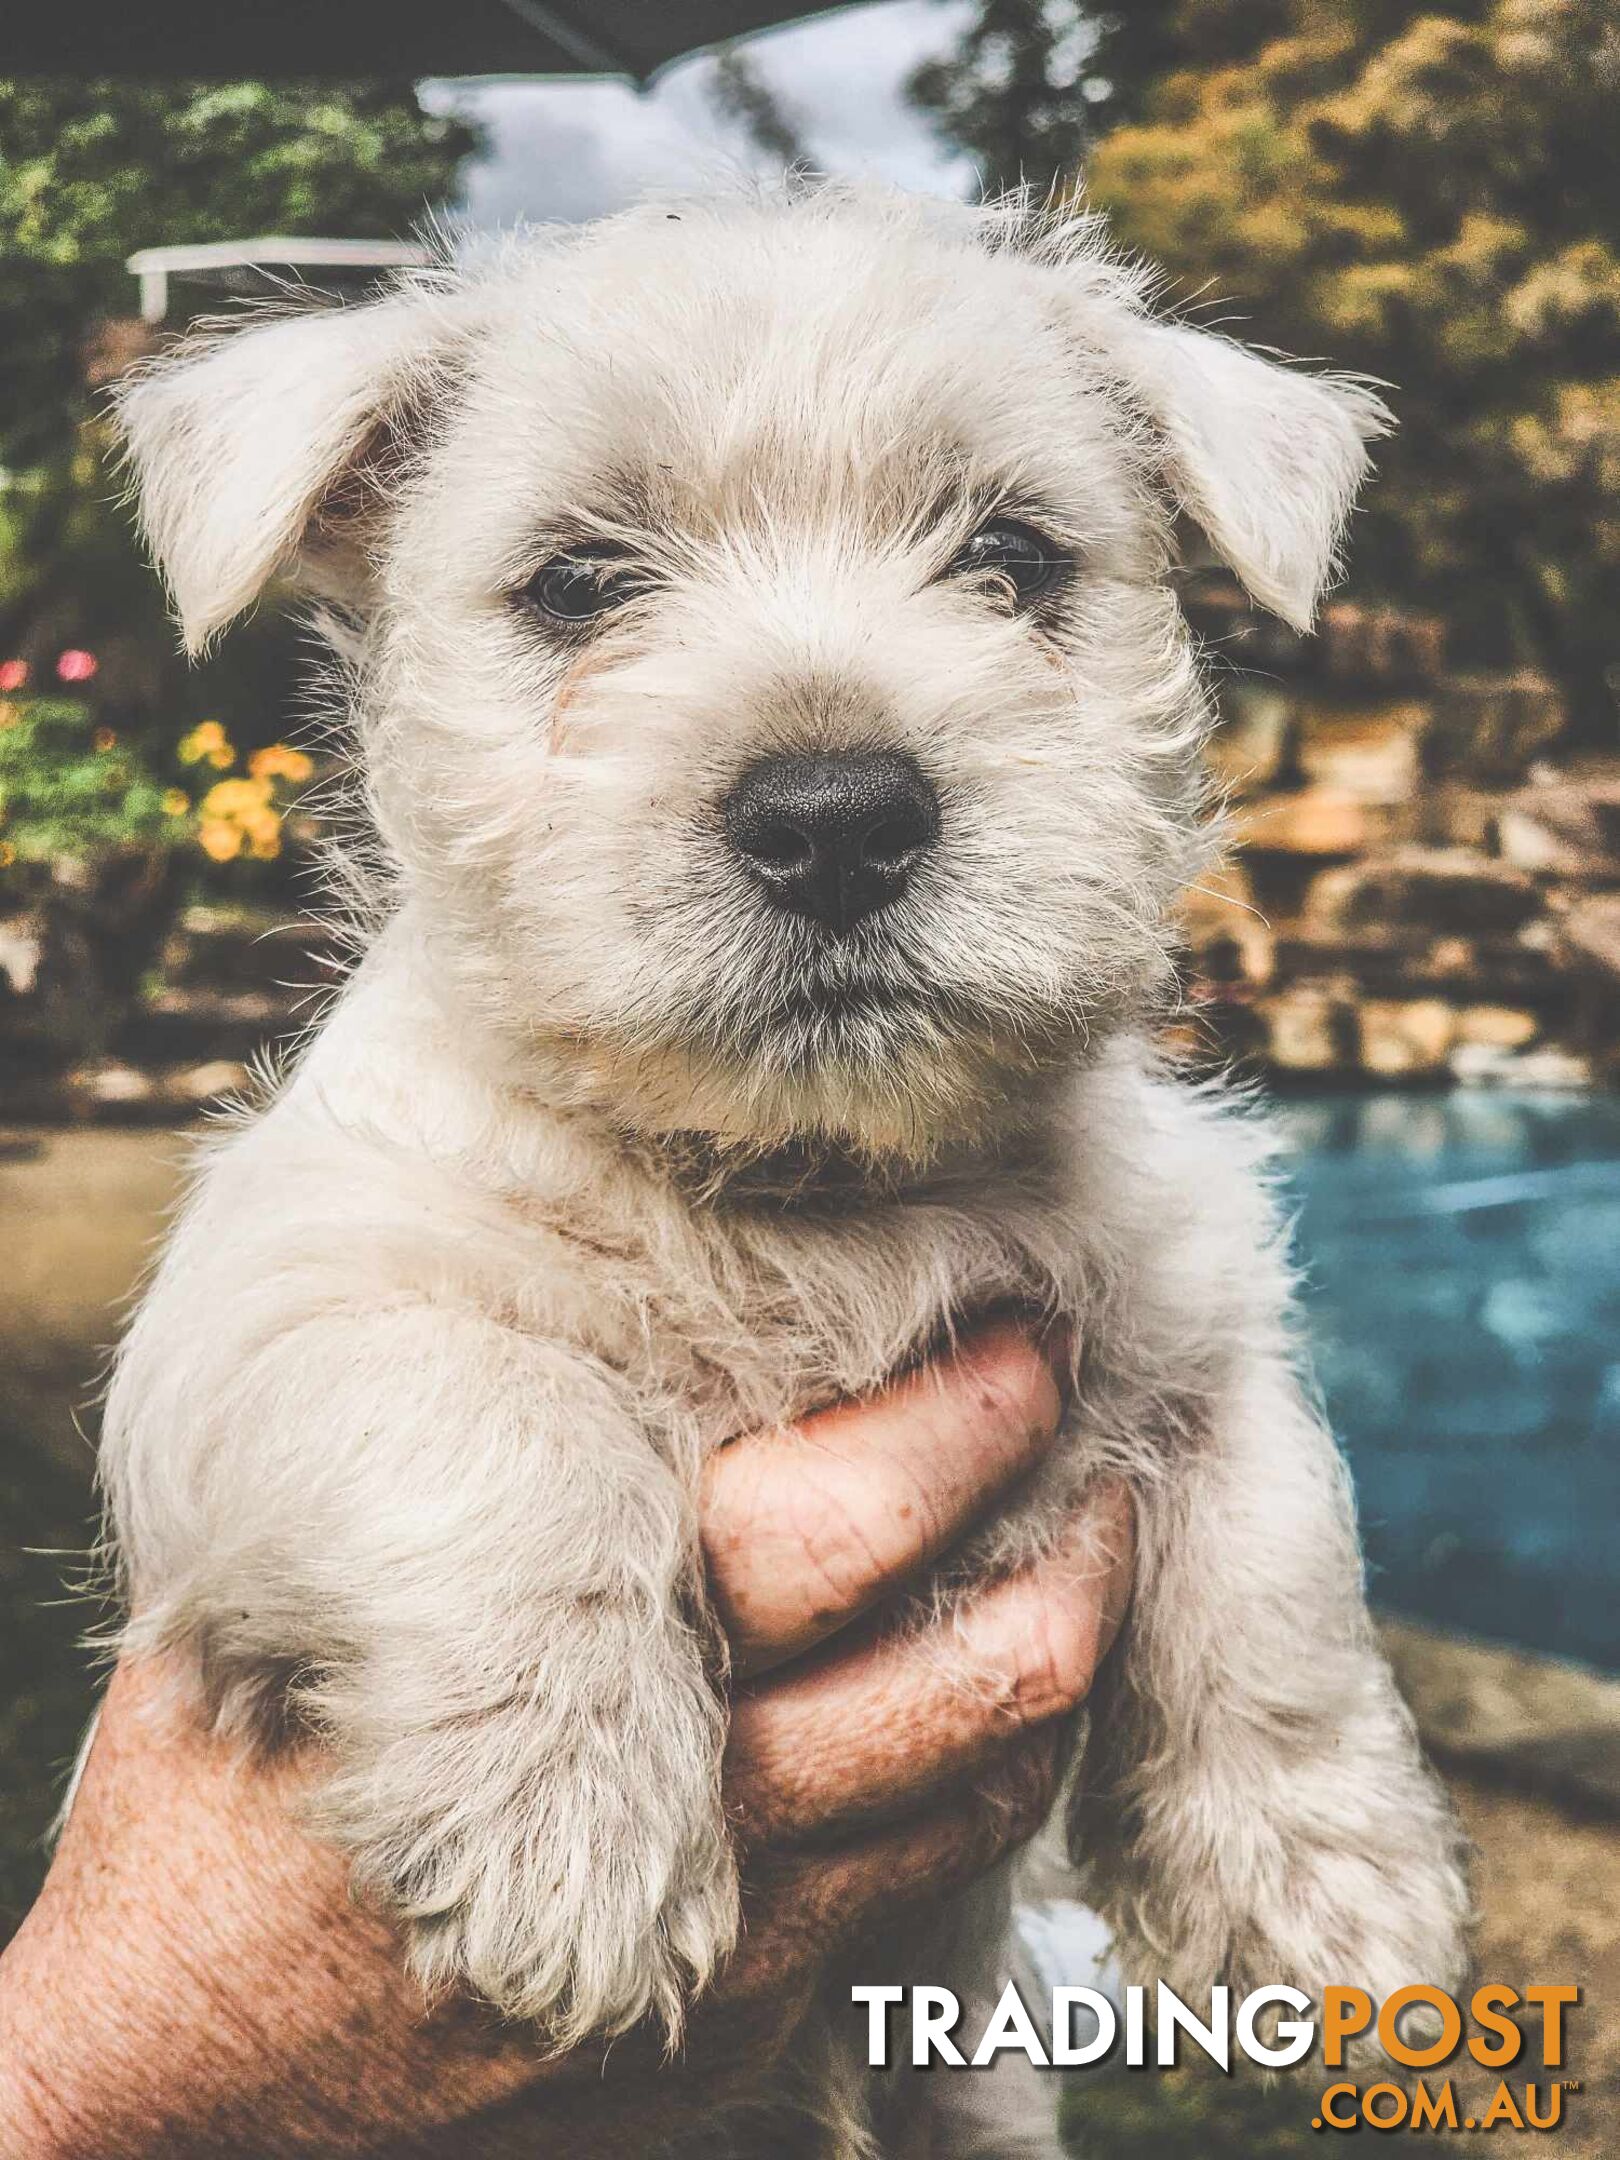 One playful West Highland White Terrier pup for sale.